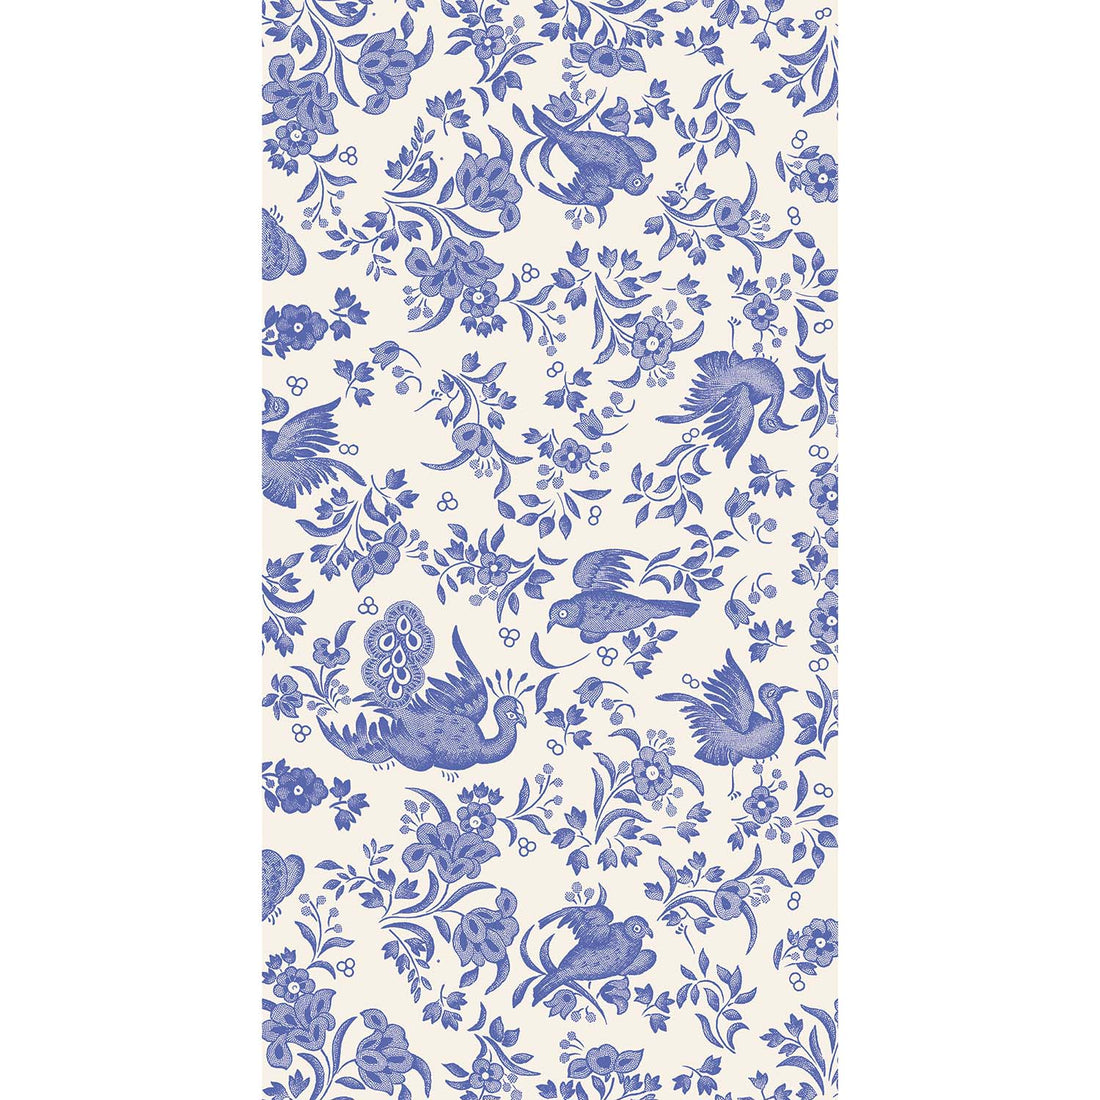 A rectangle guest napkin featuring a blue bird and floral pattern on a white background, inspired by the ornamental bird pattern from Burleigh.